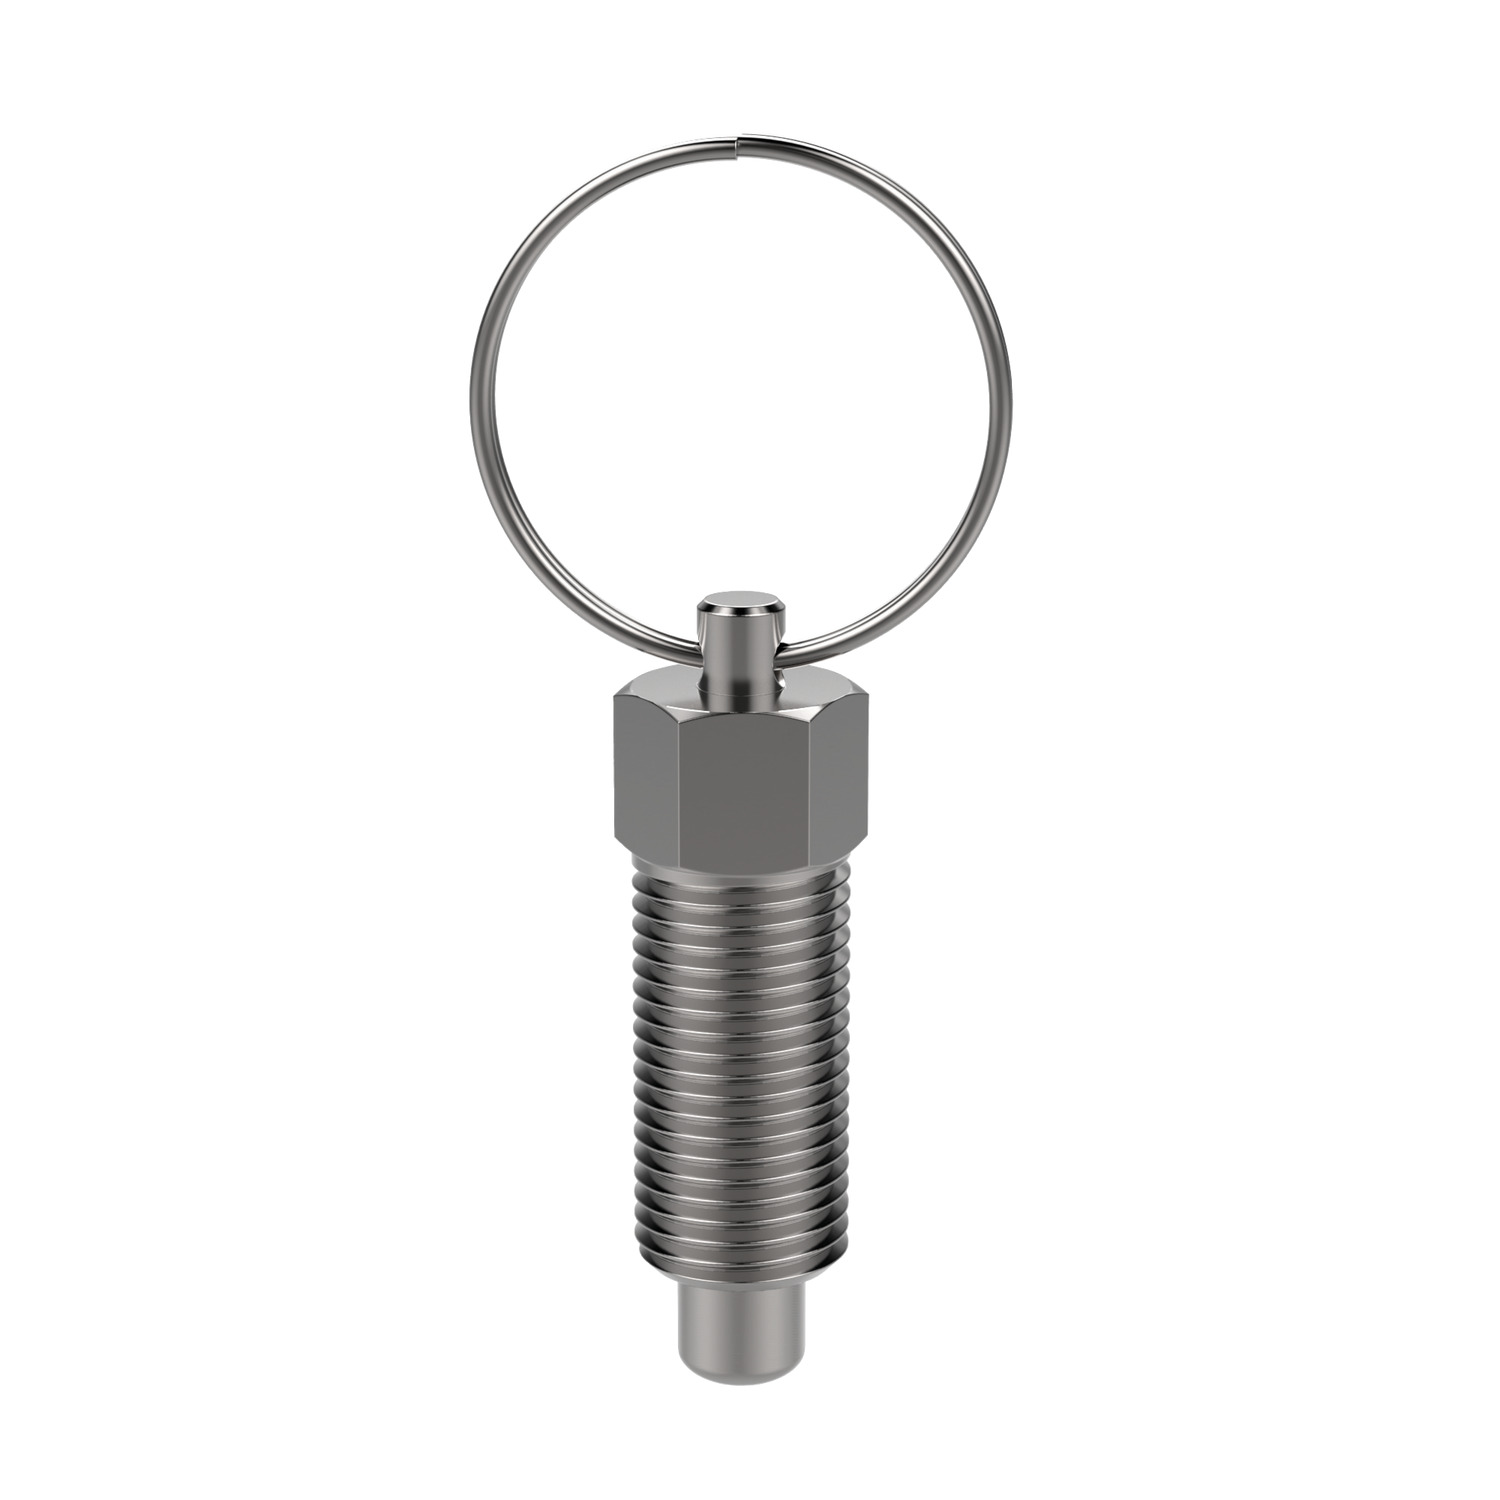 32550.W0723 Index Plungers - Free cutting steel Pull Ring - Non Locking - 3 - M 6x1,00